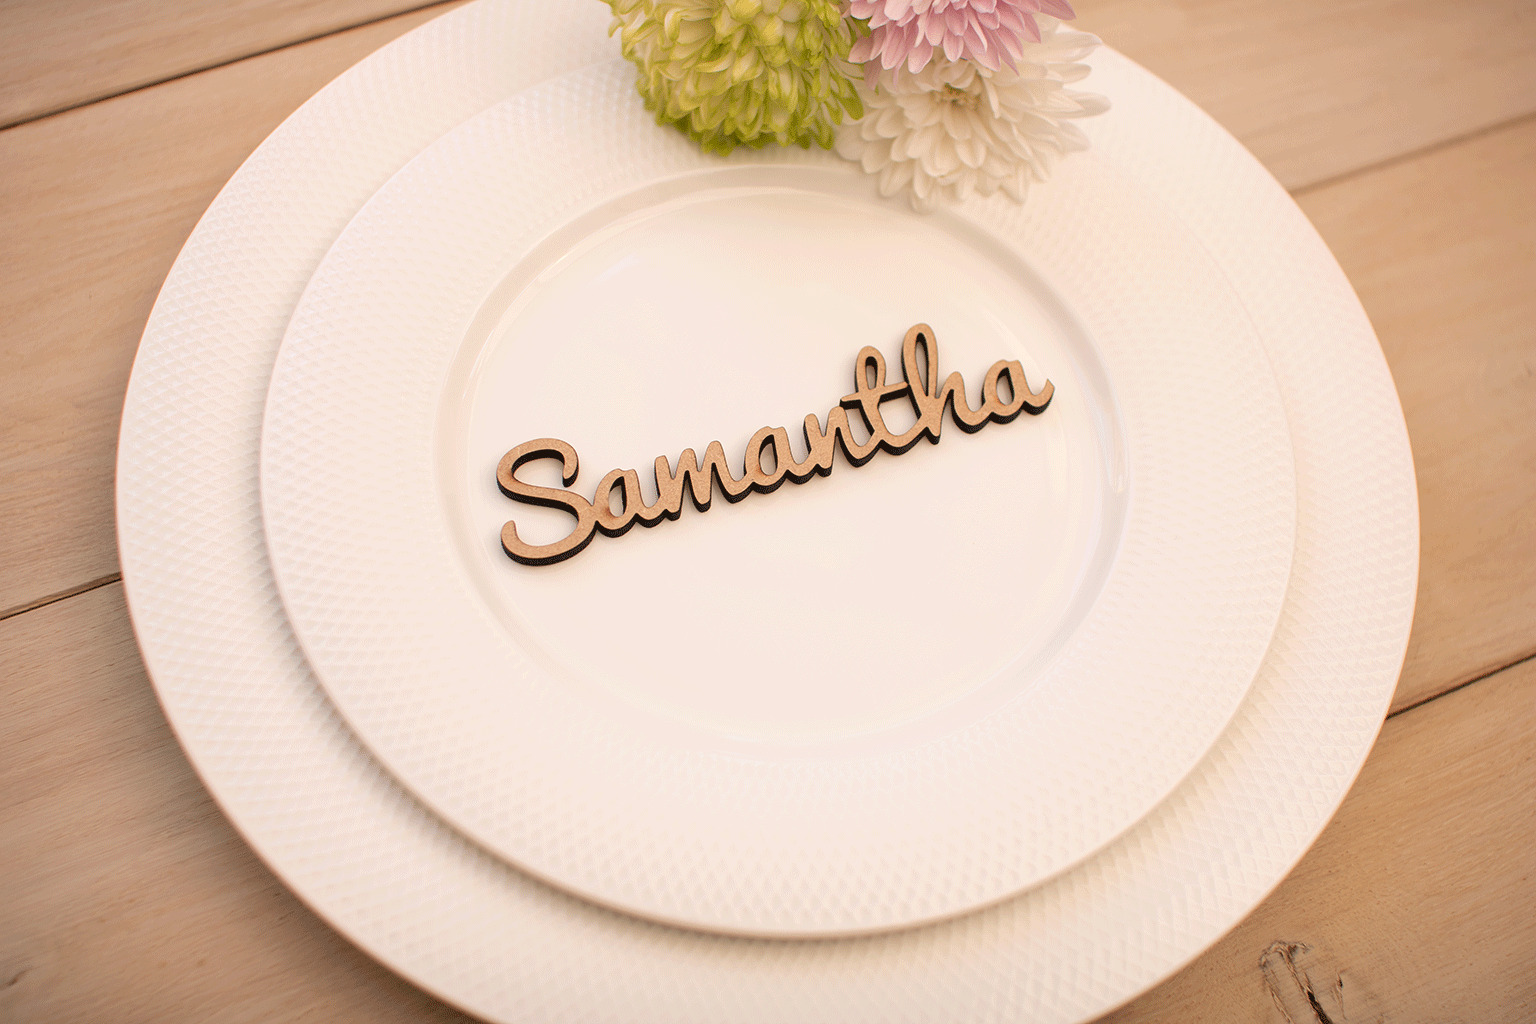 A wooden wedding placename on a white plate